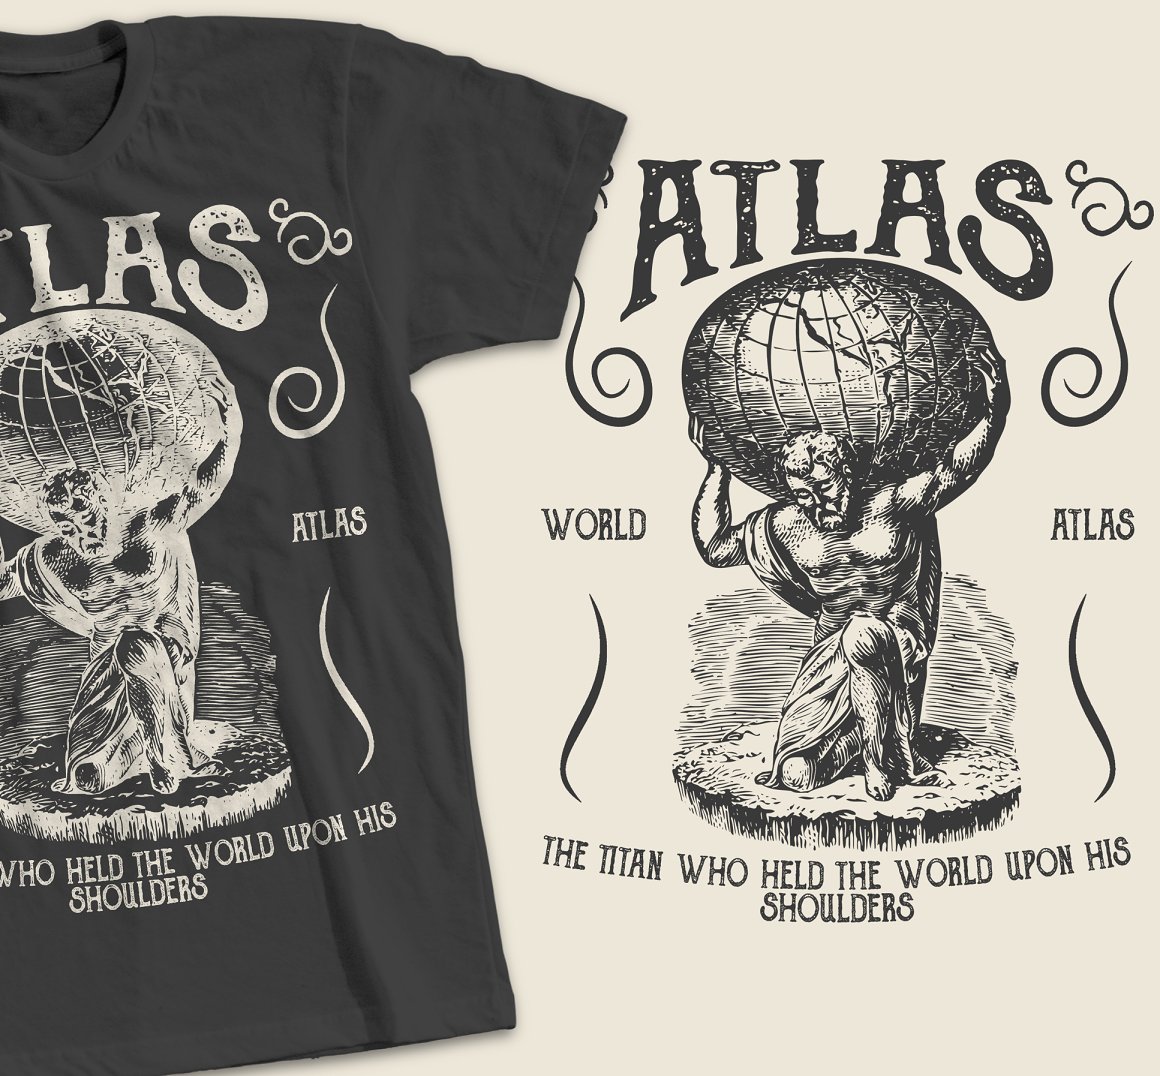 White image of a mythical character - Titan with the lettering "Atlas" on black t-shirt and black same image with lettering on a white background.